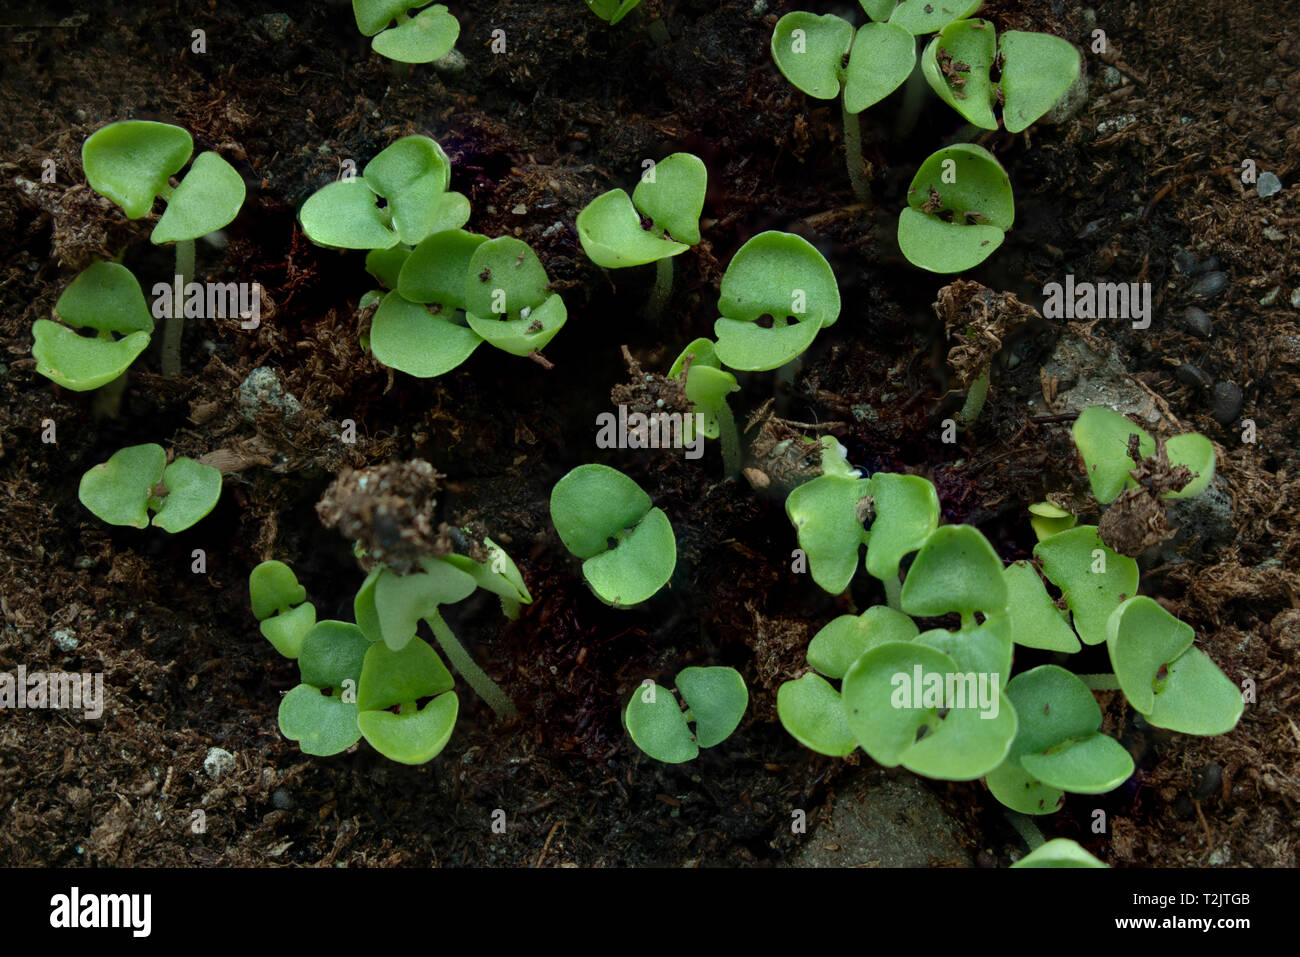 green basil sprouts growing in soil. Stock Photo